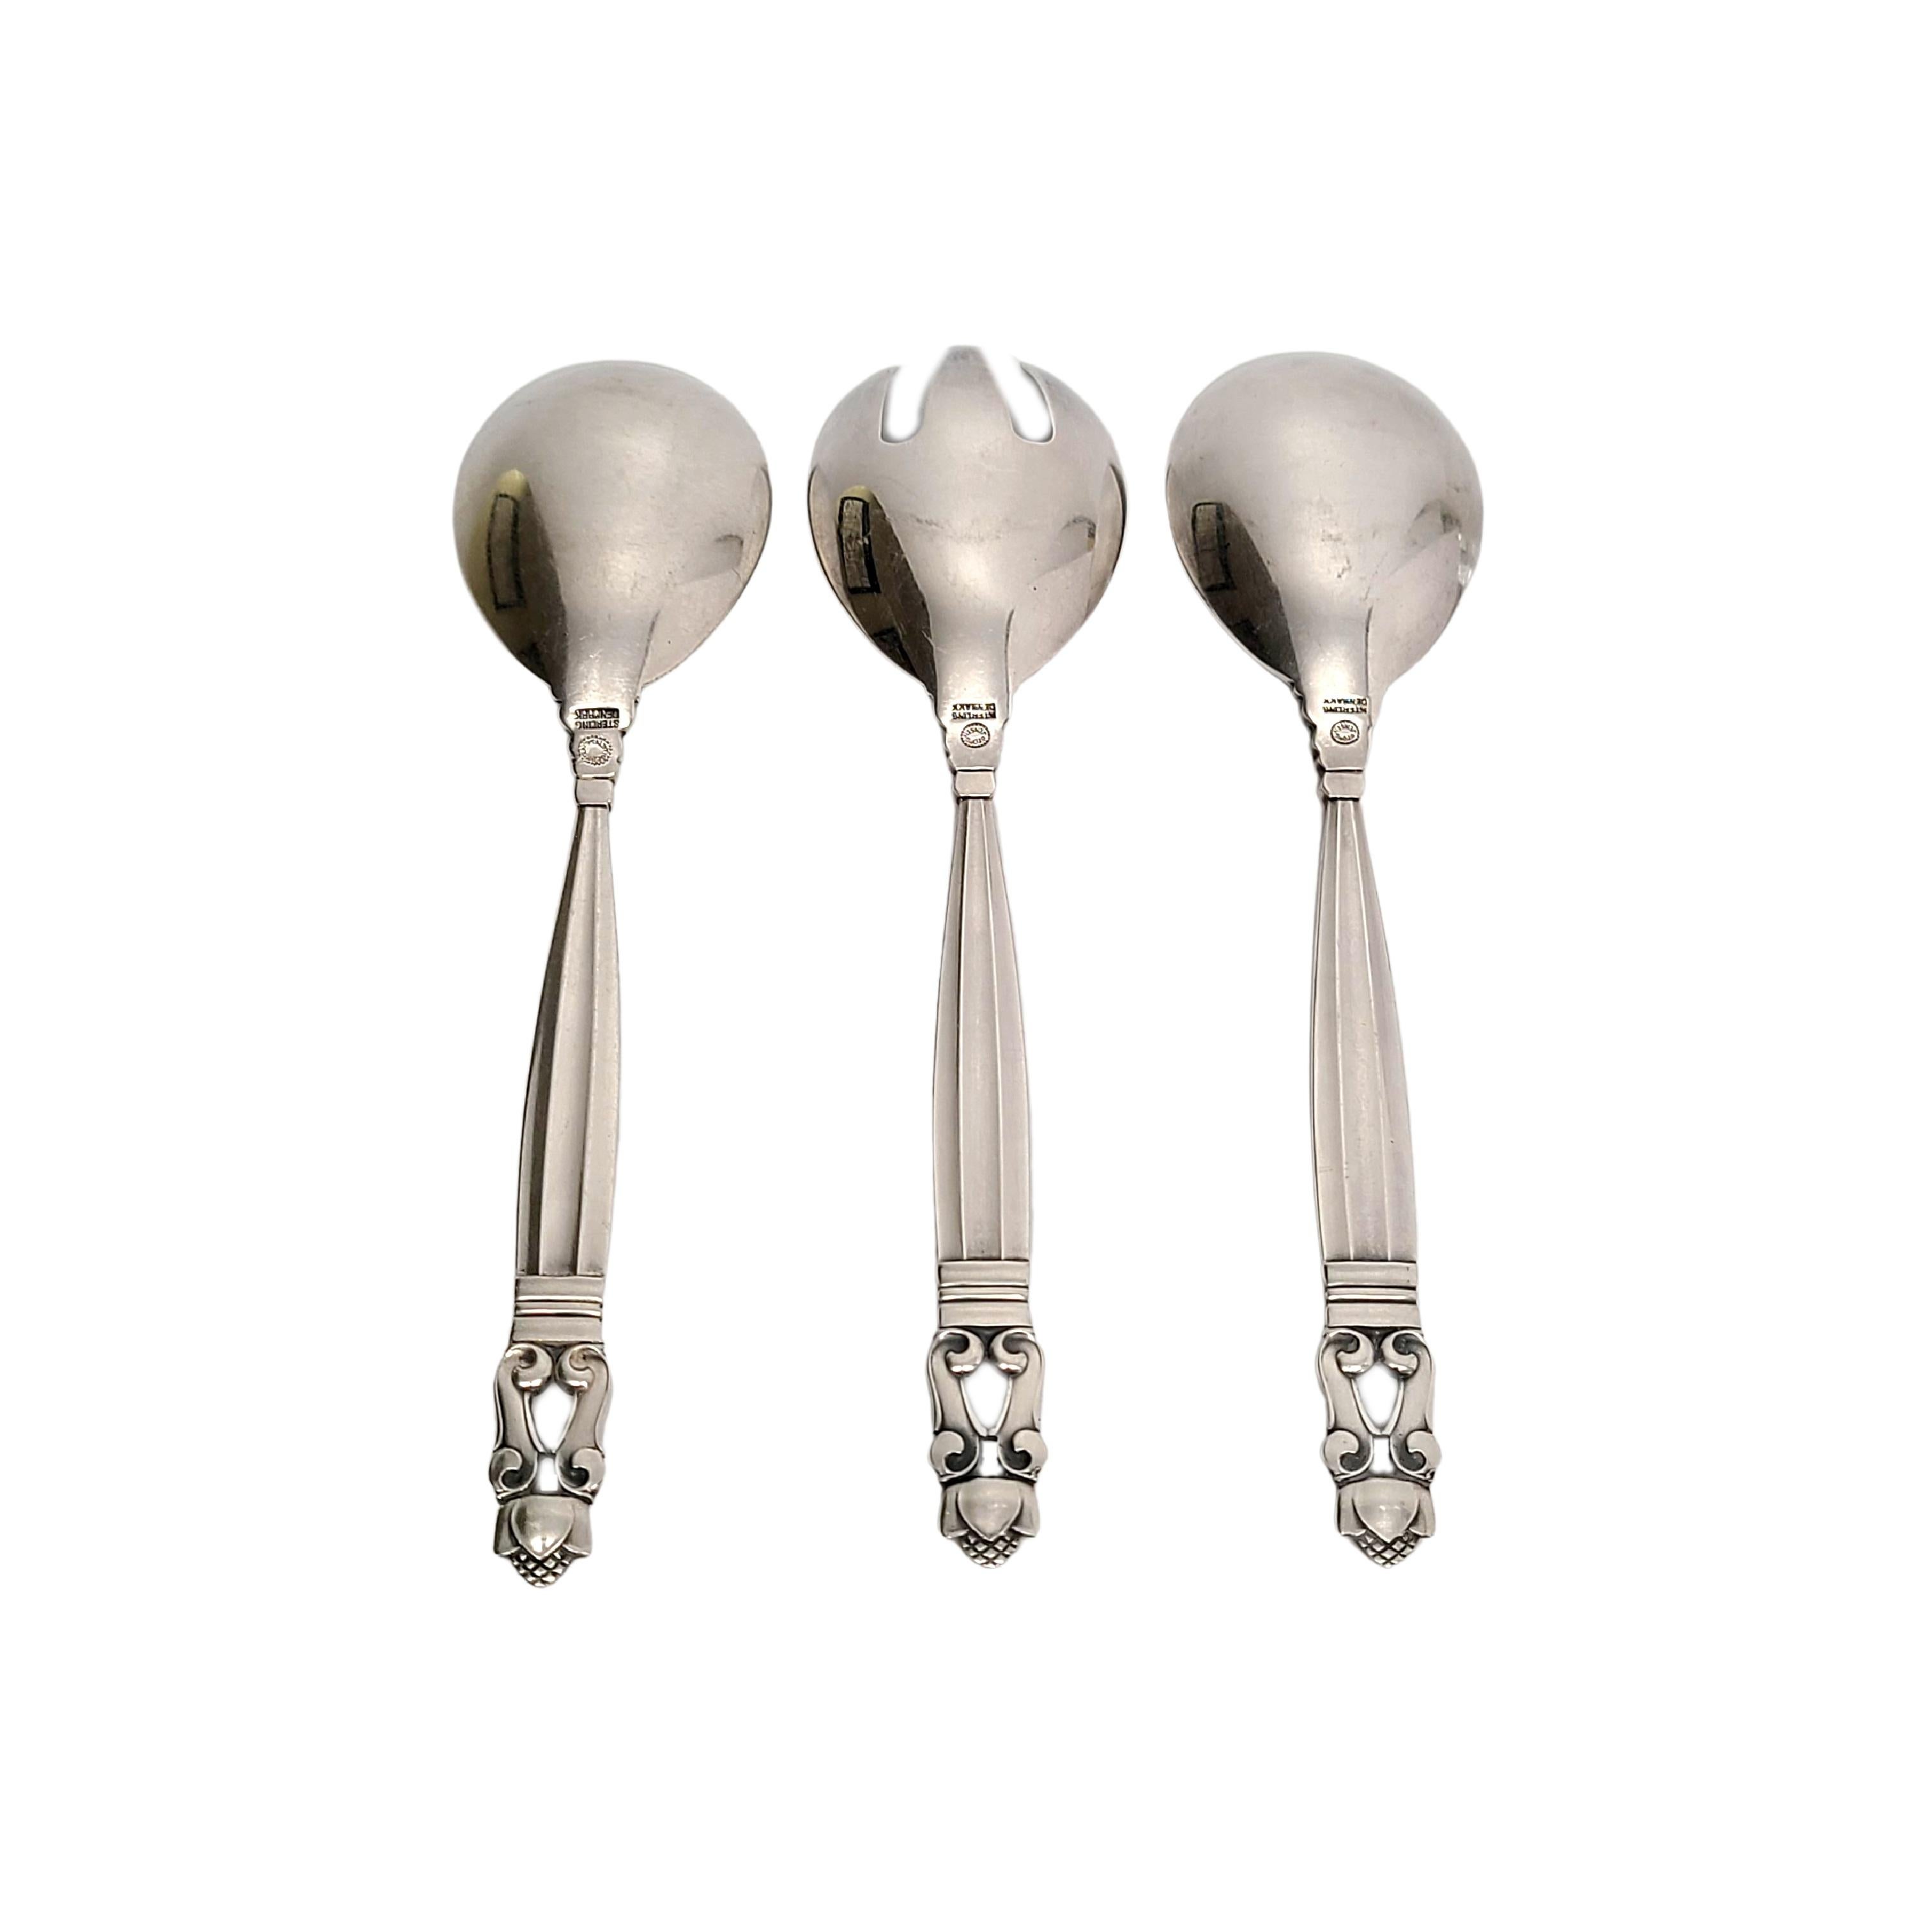 Set of 3 sterling silver ice cream spoons and fork in the Acorn pattern by Georg Jensen

The Acorn pattern was introduced in 1915 as a collaboration between Georg Jensen and designer Johan Ronde. The Acorn pattern, which combines Art Nouveau and Art